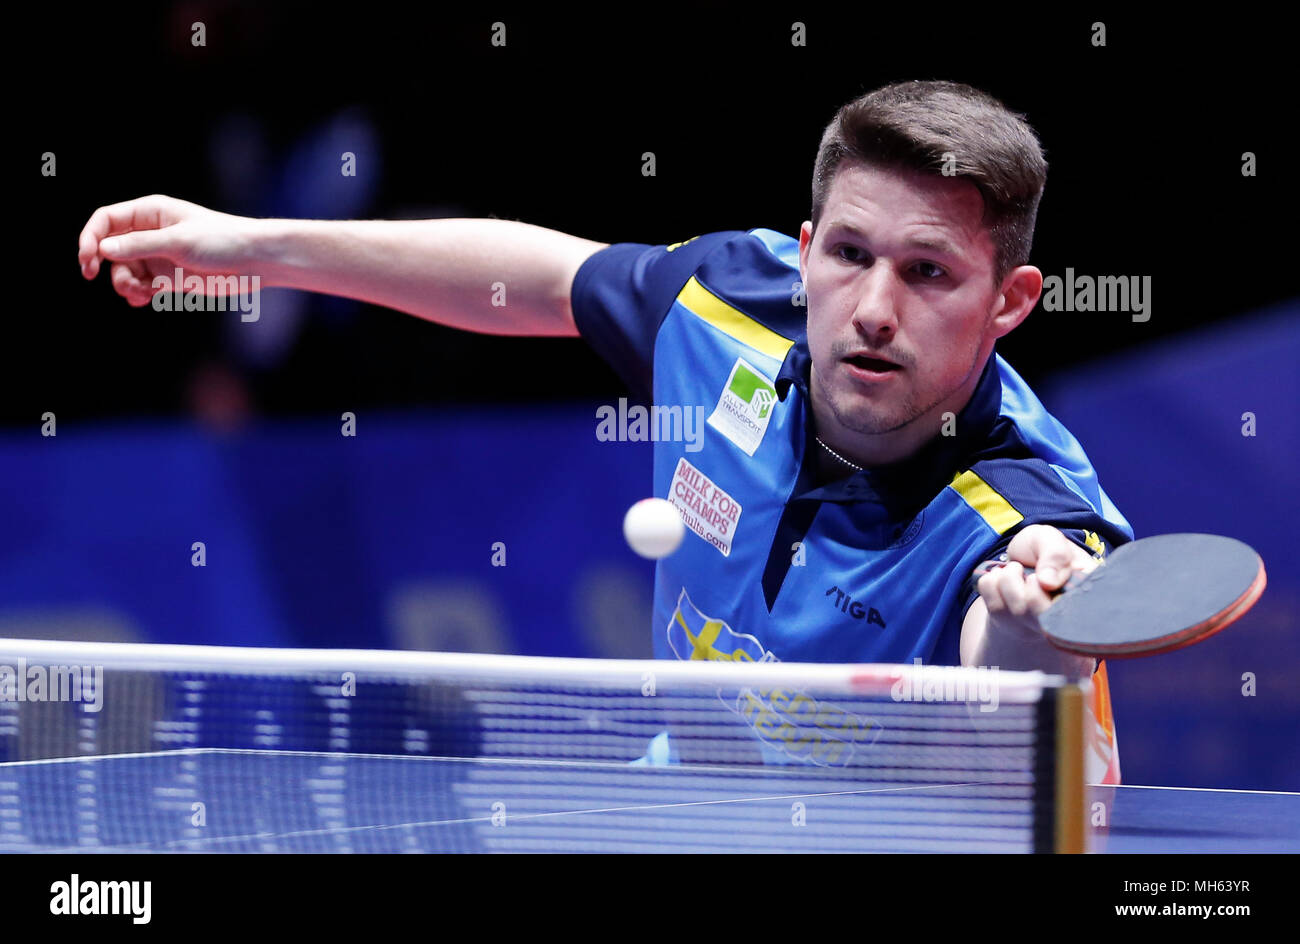 https://c8.alamy.com/comp/MH63YR/halmstad-sweden-30th-apr-2018-kristian-karlsson-of-sweden-returns-the-ball-to-patrick-franziska-of-germany-during-the-mens-group-a-third-round-match-of-2018-world-team-table-tennis-championships-in-halmstad-sweden-on-april-30-2018-kristian-karlsson-lost-2-3-credit-ye-pingfanxinhuaalamy-live-news-MH63YR.jpg